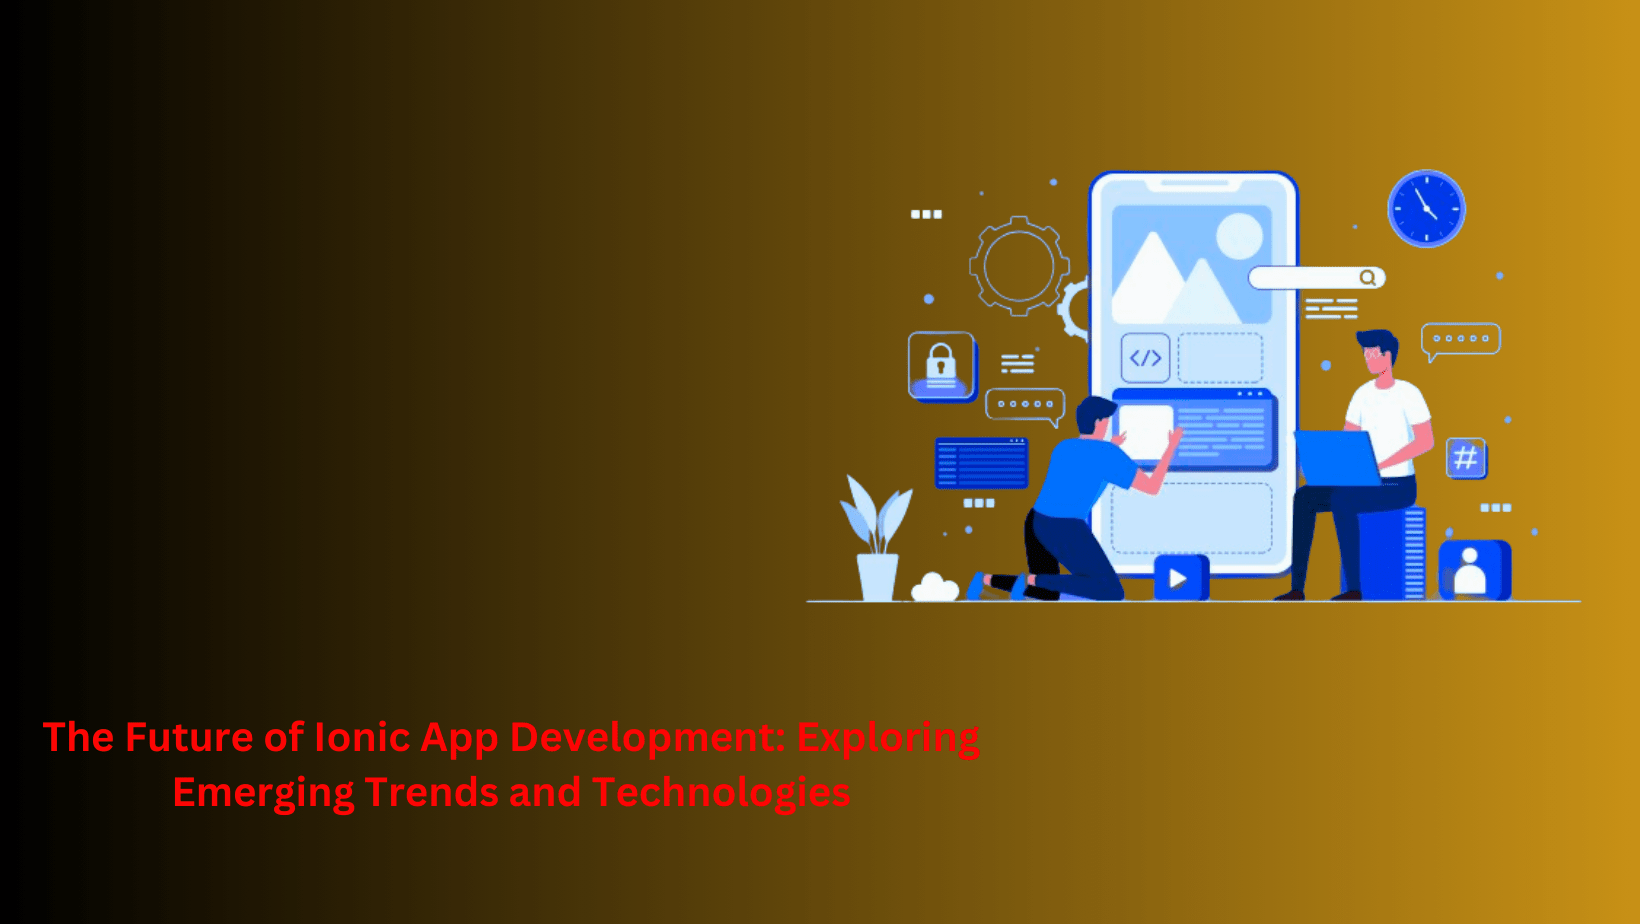 The Future of Ionic: Exploring Emerging Trends & Technologies